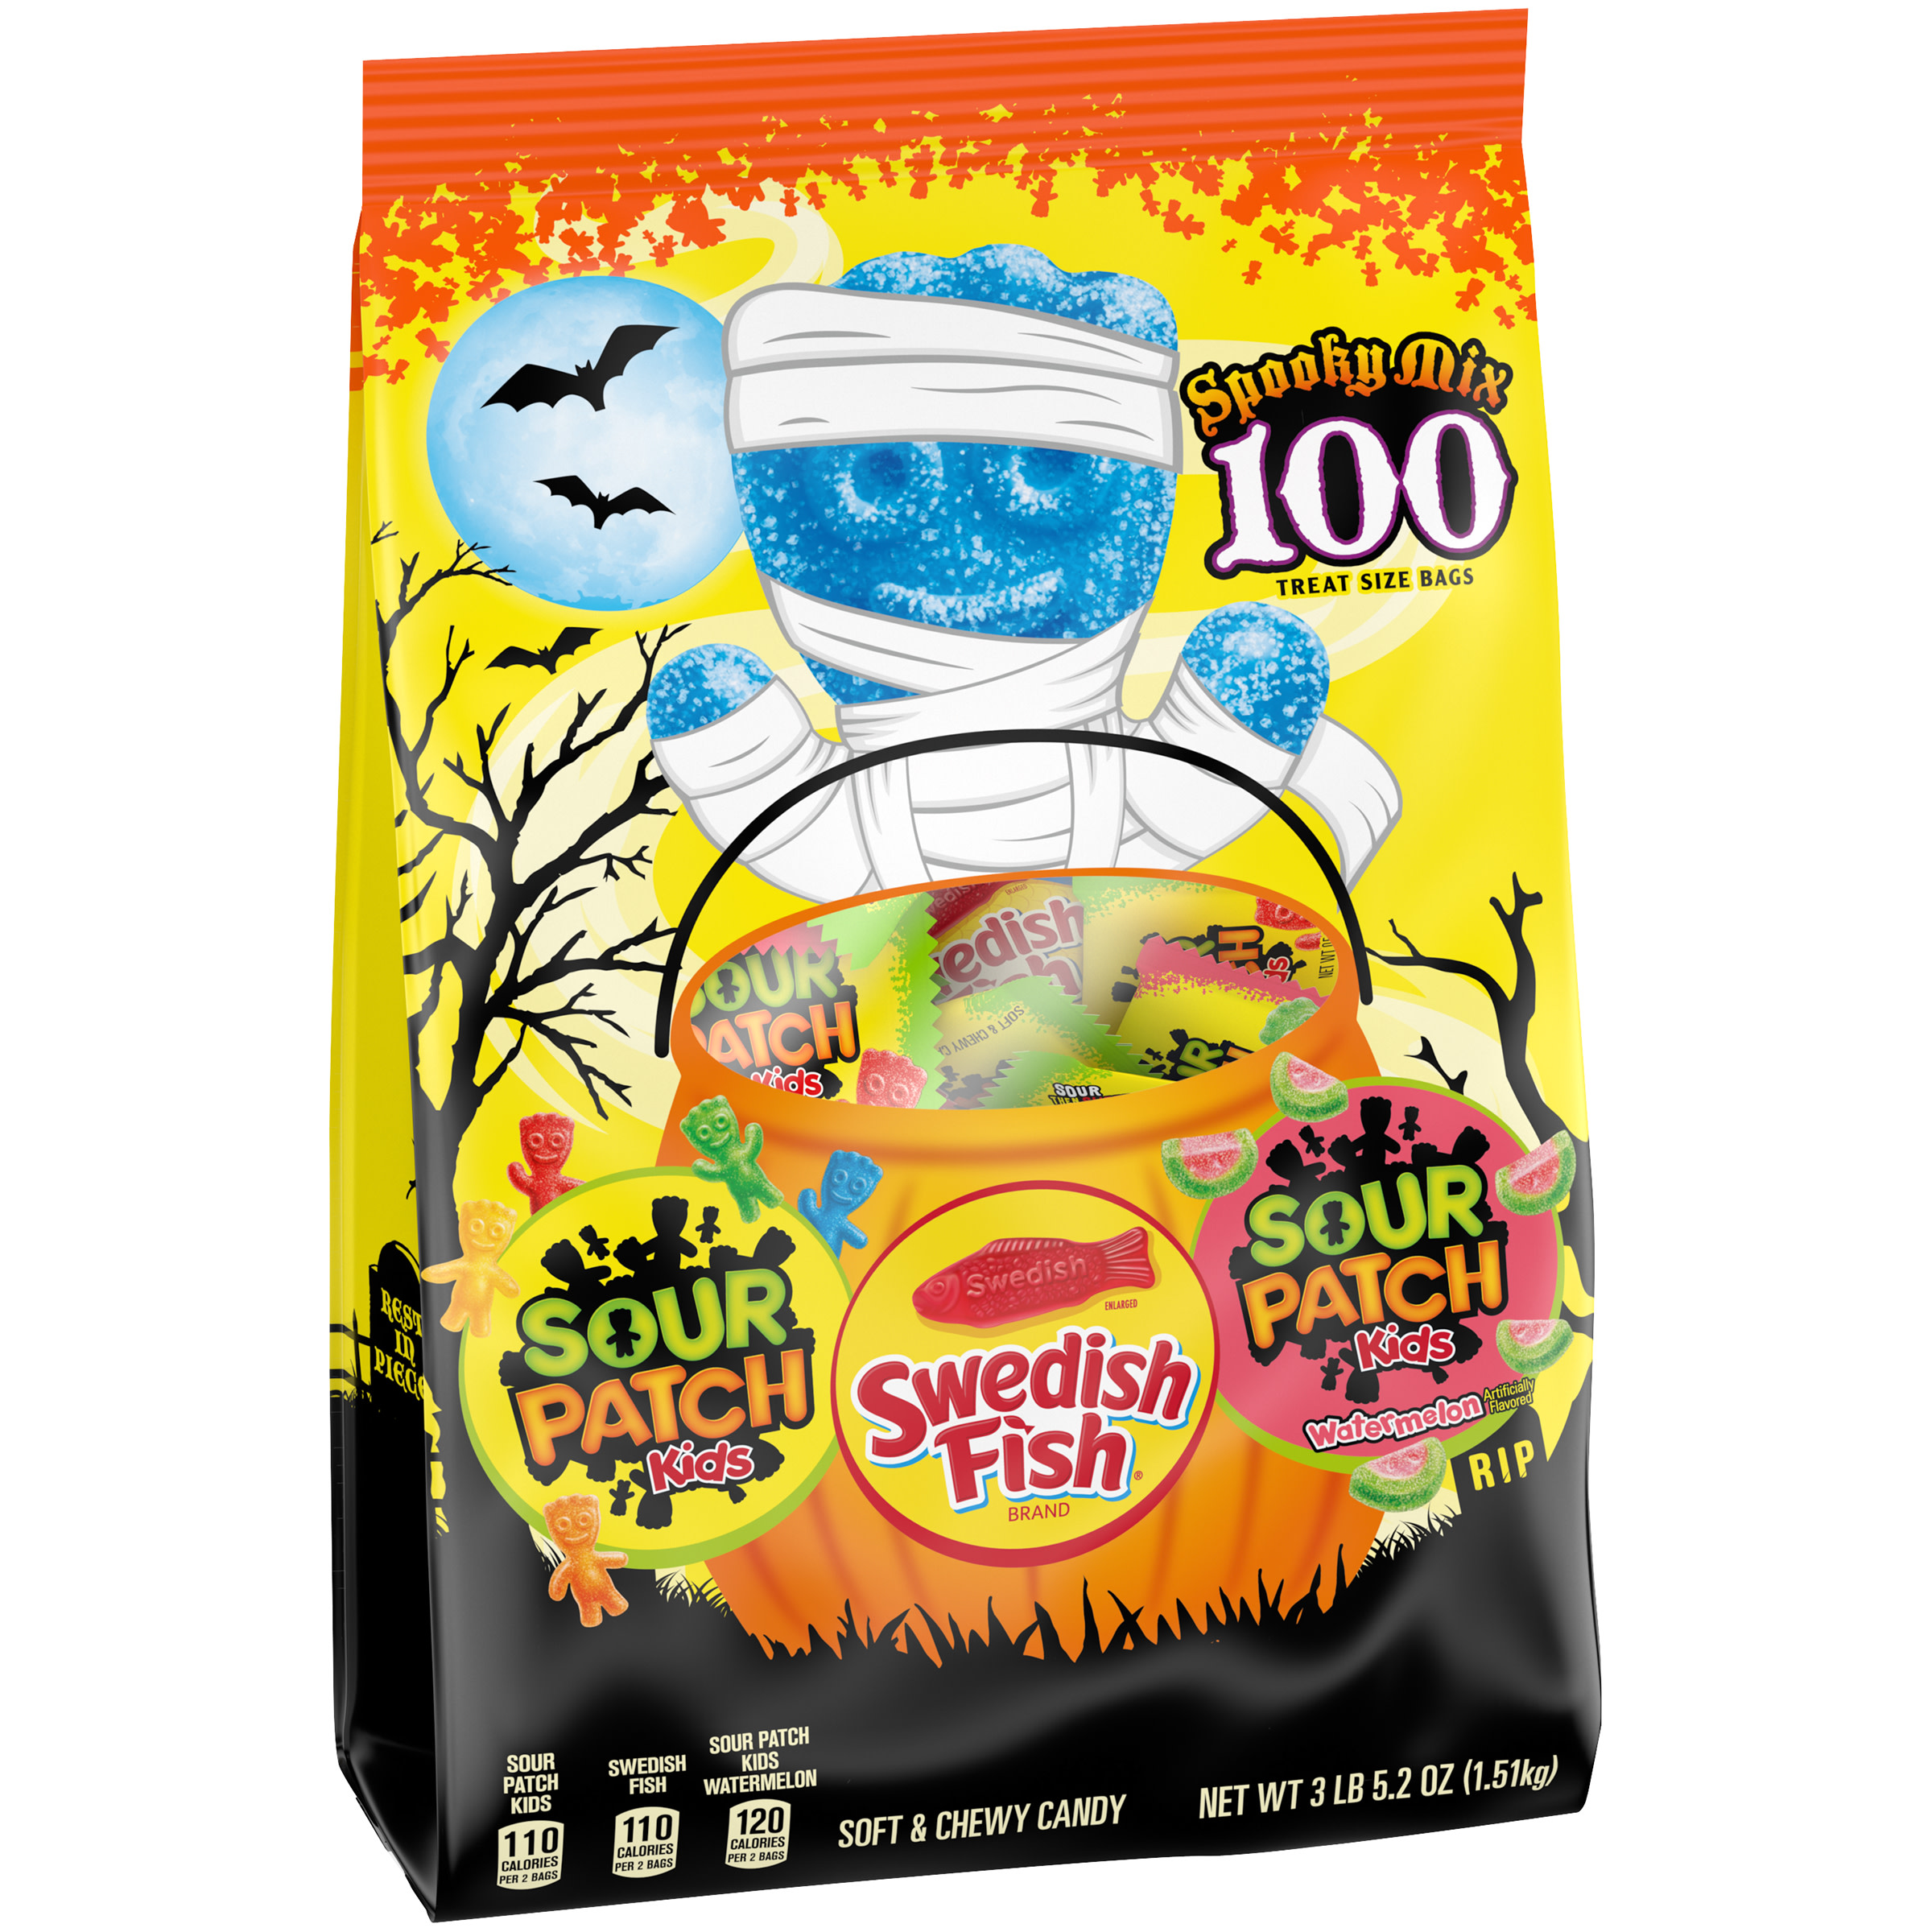 SOUR PATCH KIDS Candy (Original and Watermelon) and SWEDISH FISH Candy Halloween Candy Variety Pack, 1 - 100 Trick or Treat Snack Packs - image 2 of 20